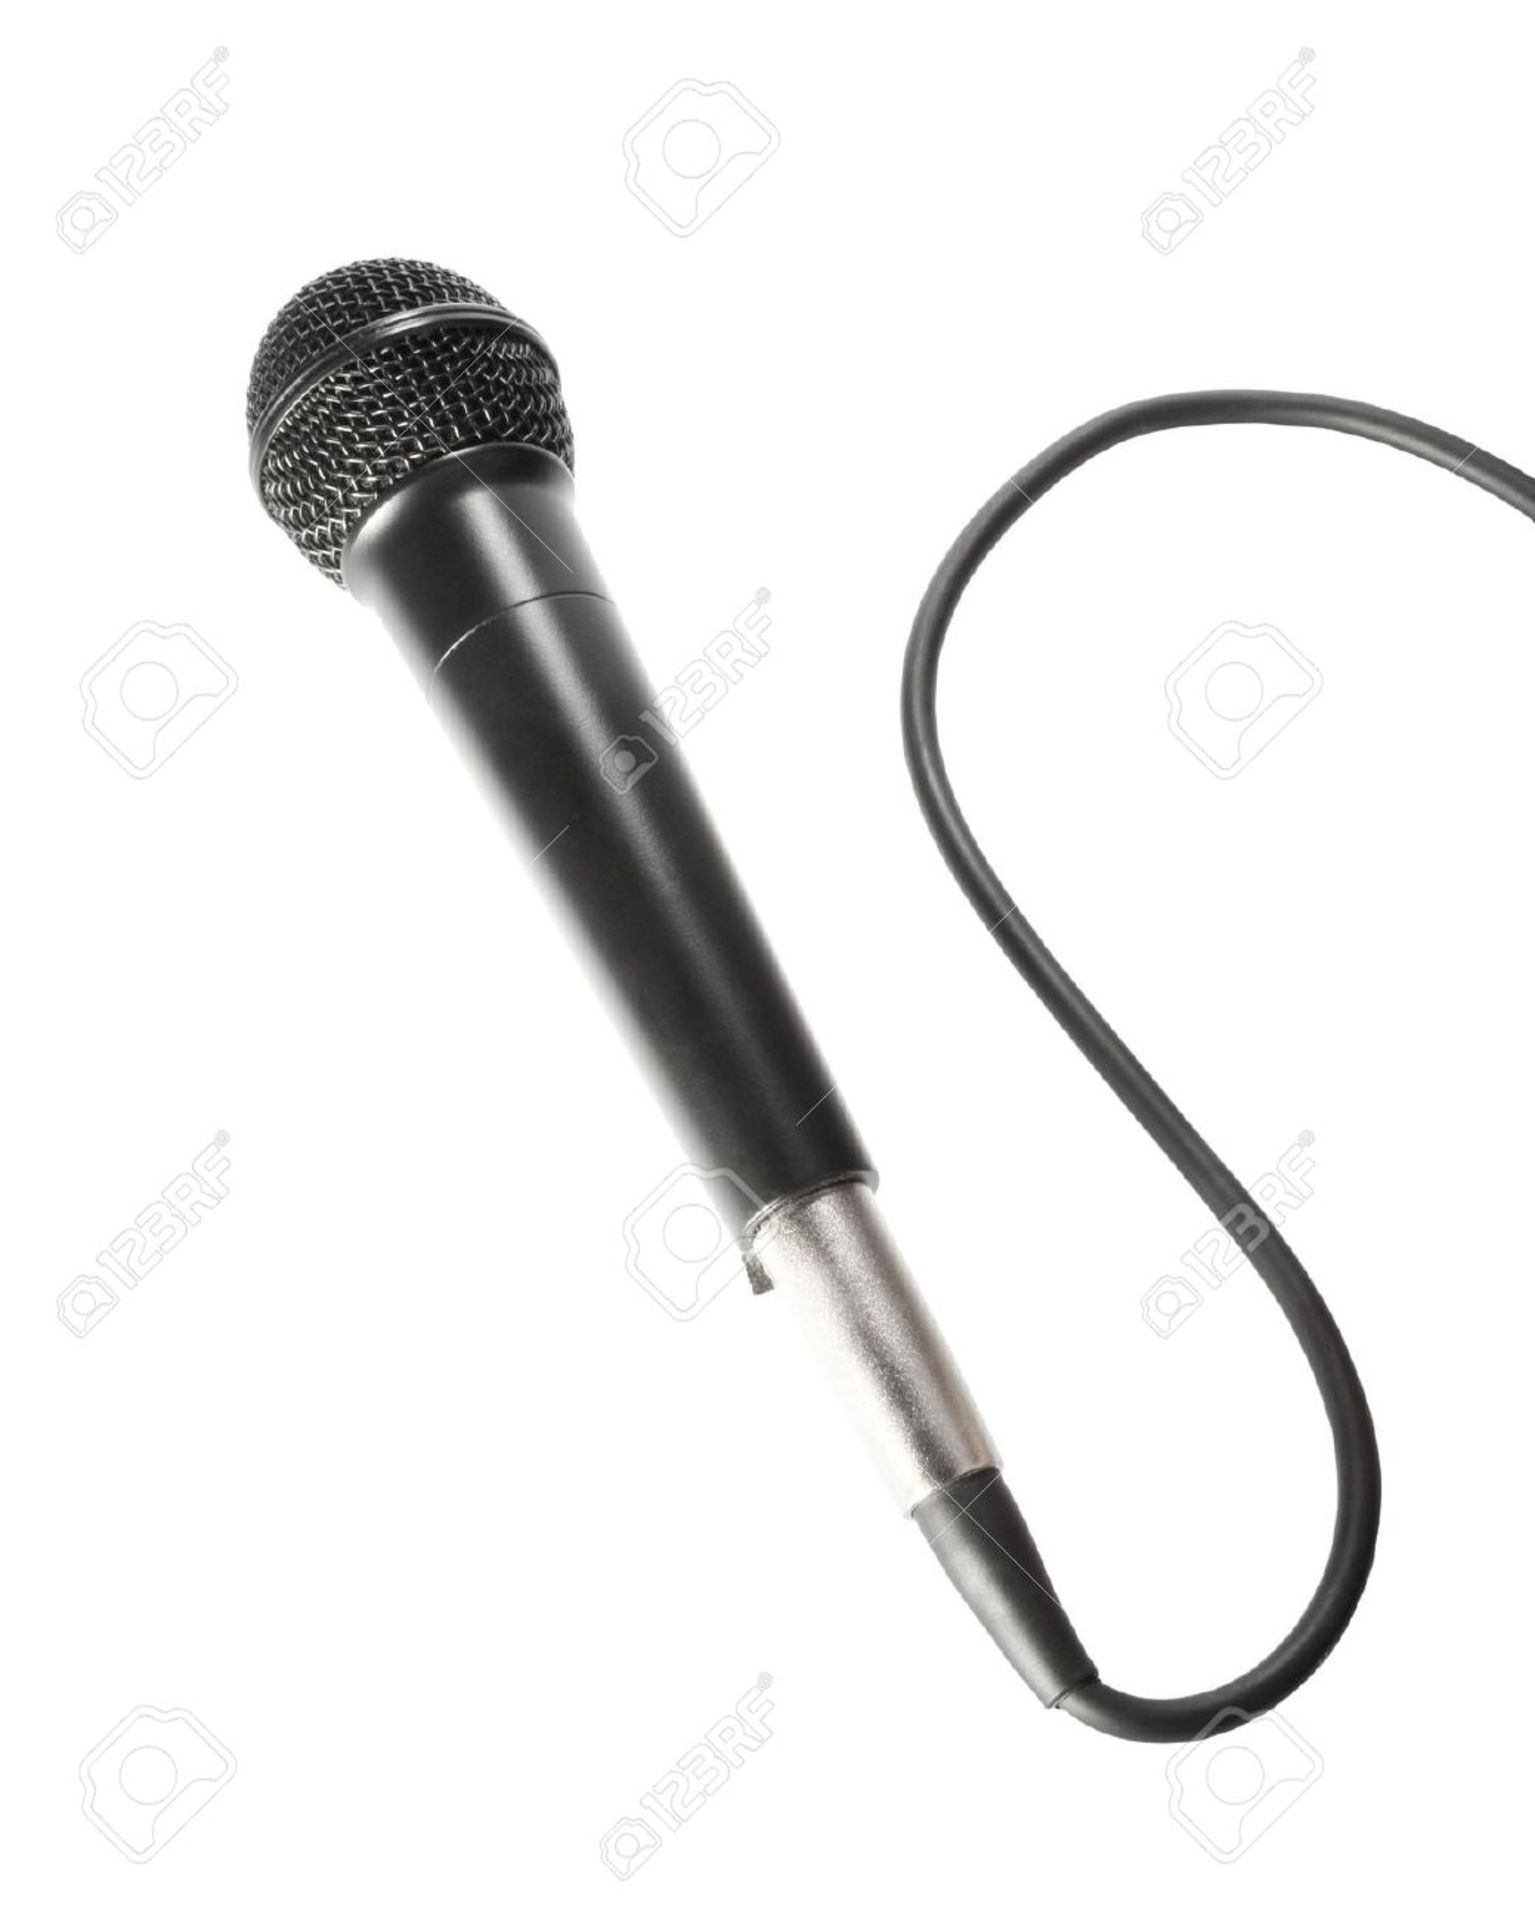 V *TRADE QTY* Brand New Dynamic Microphone With Extra Adaptor And 9 Foot Cord - Ideal For Karaoke (